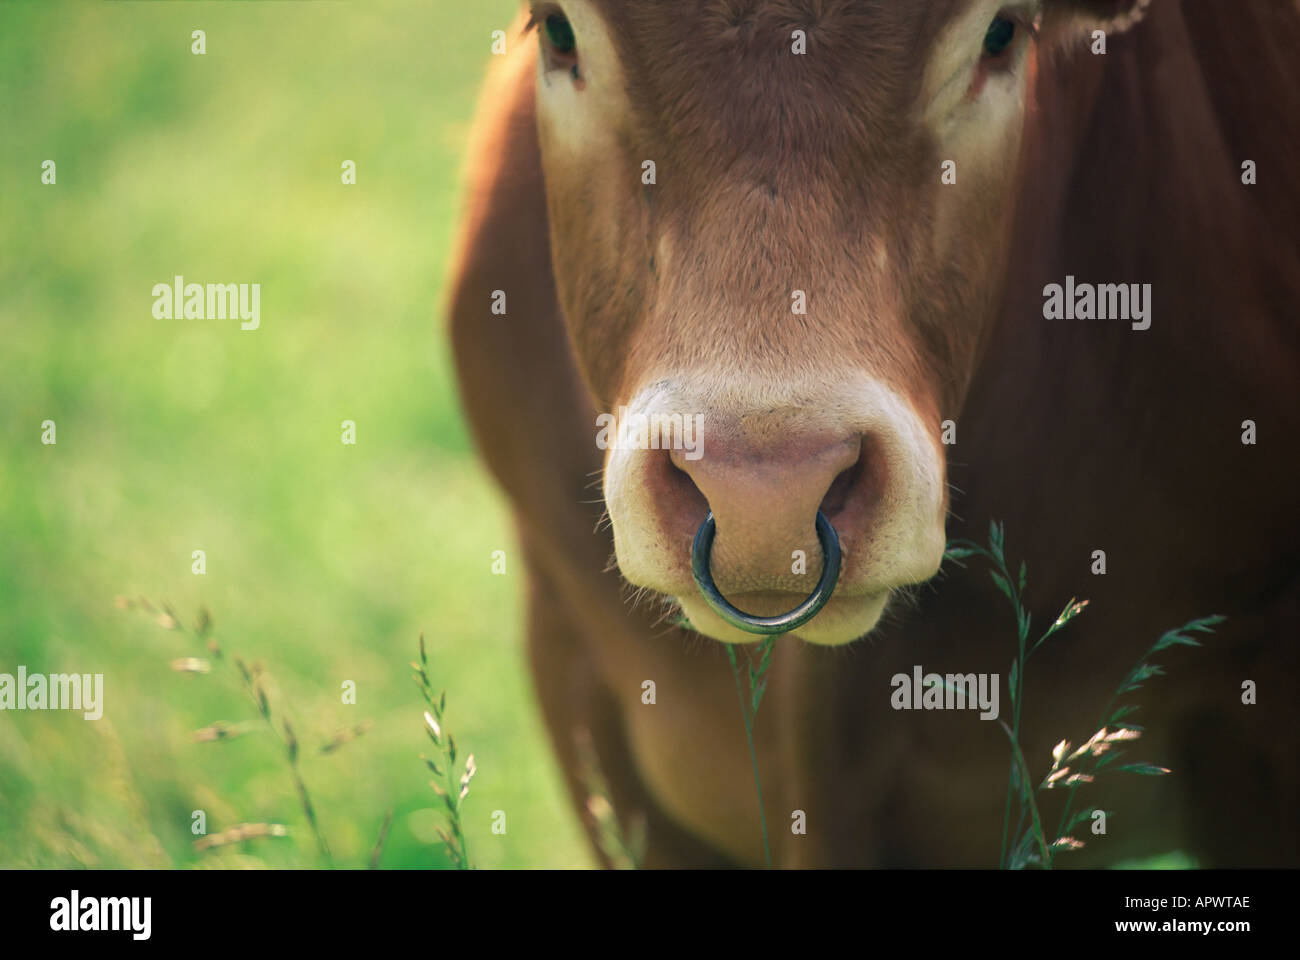 Cow with a nose ring Stock Photo